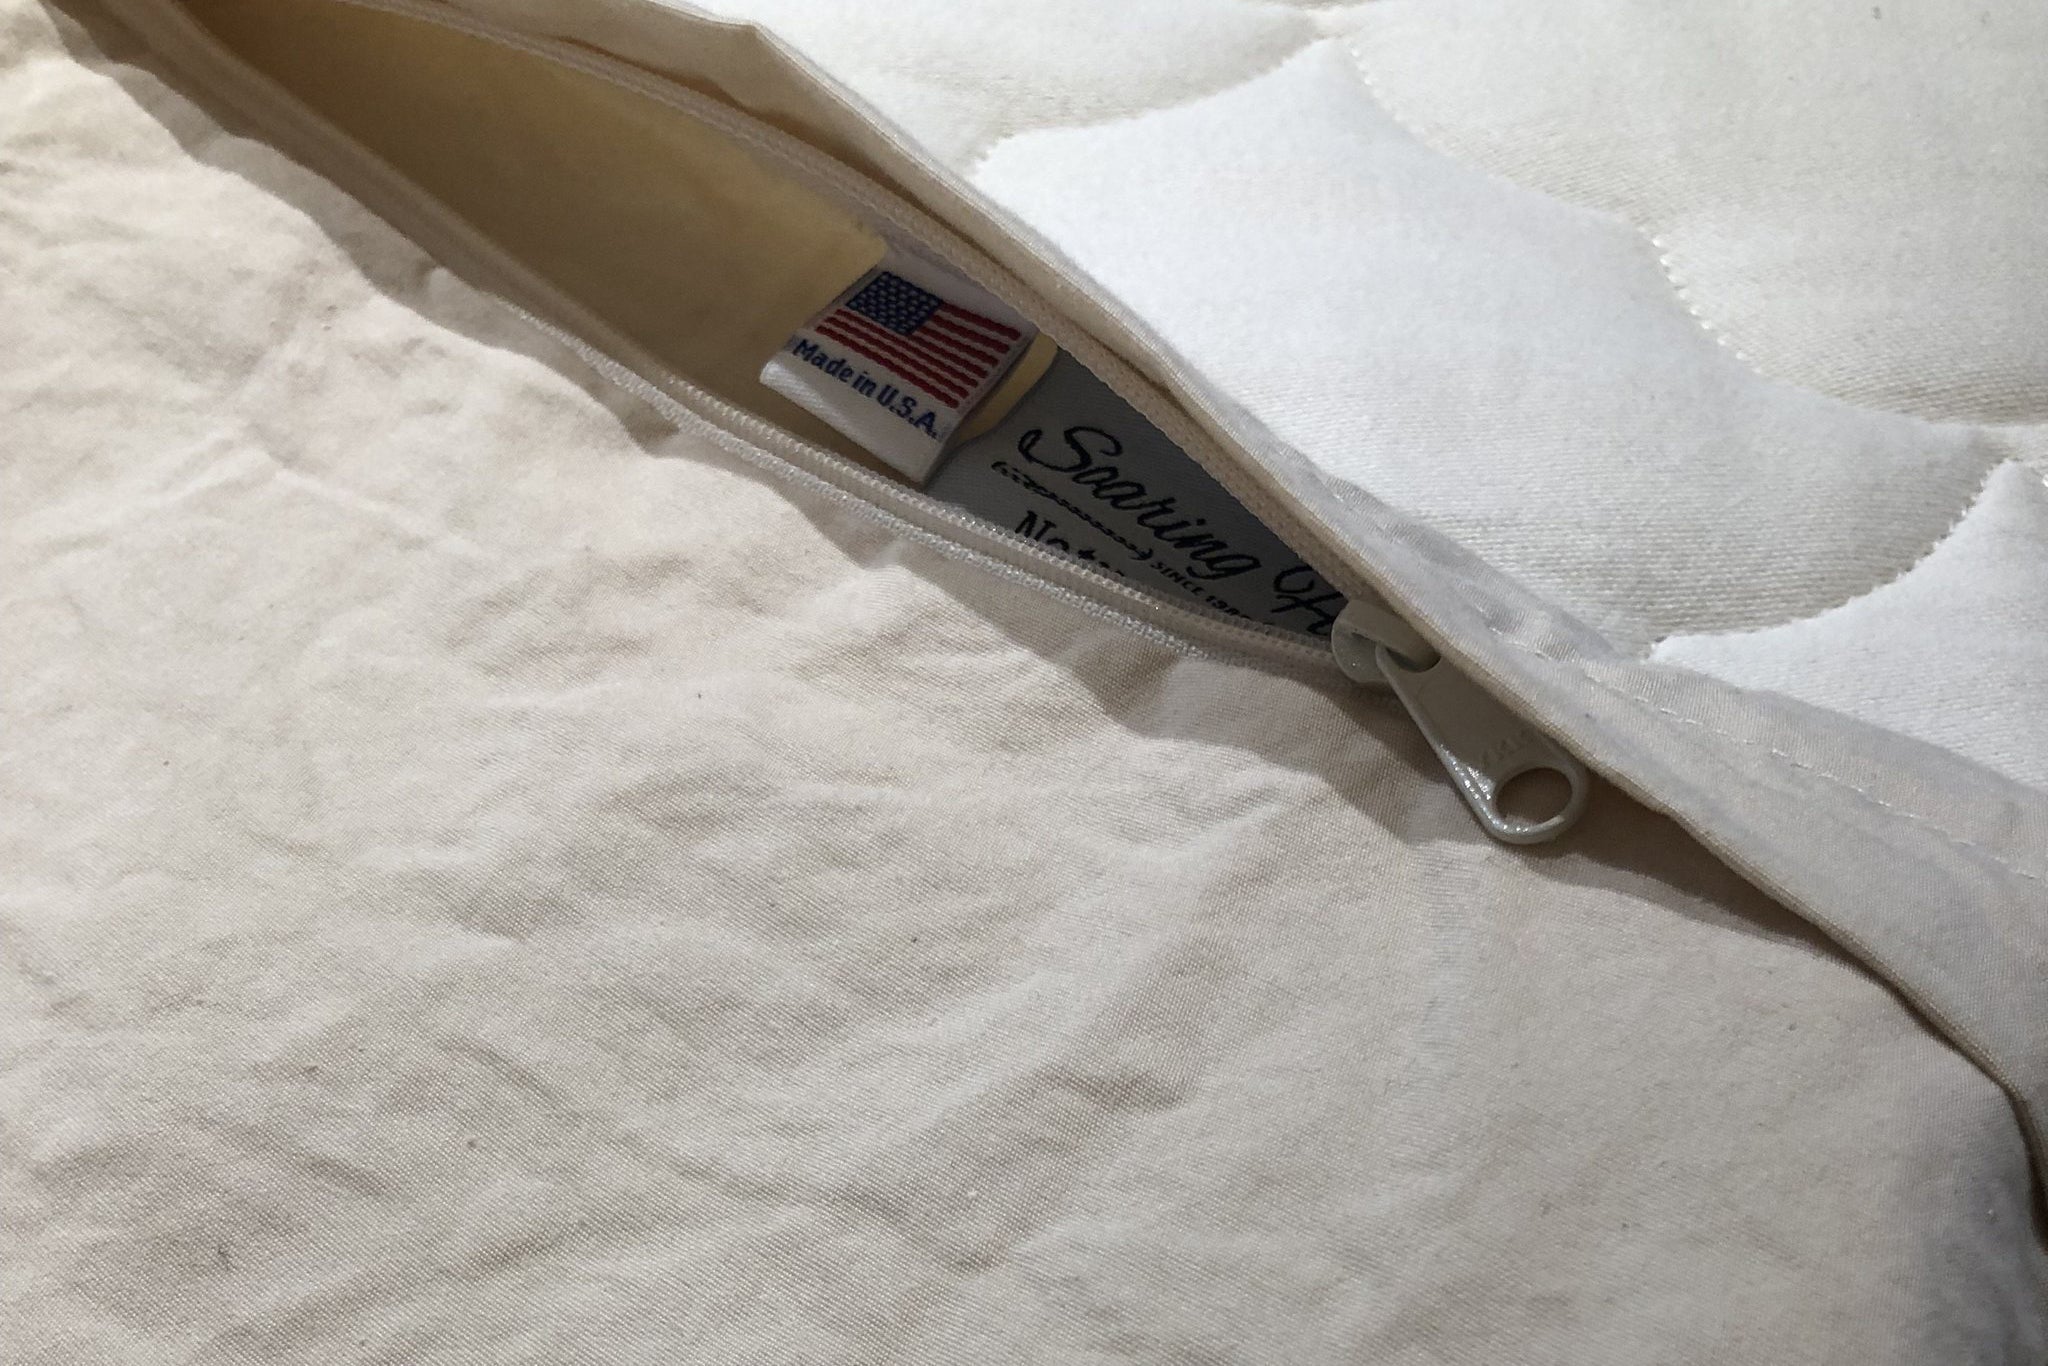 QUEEN size-Natural Comfort-Allergy-Shield s Anti-Dustmite